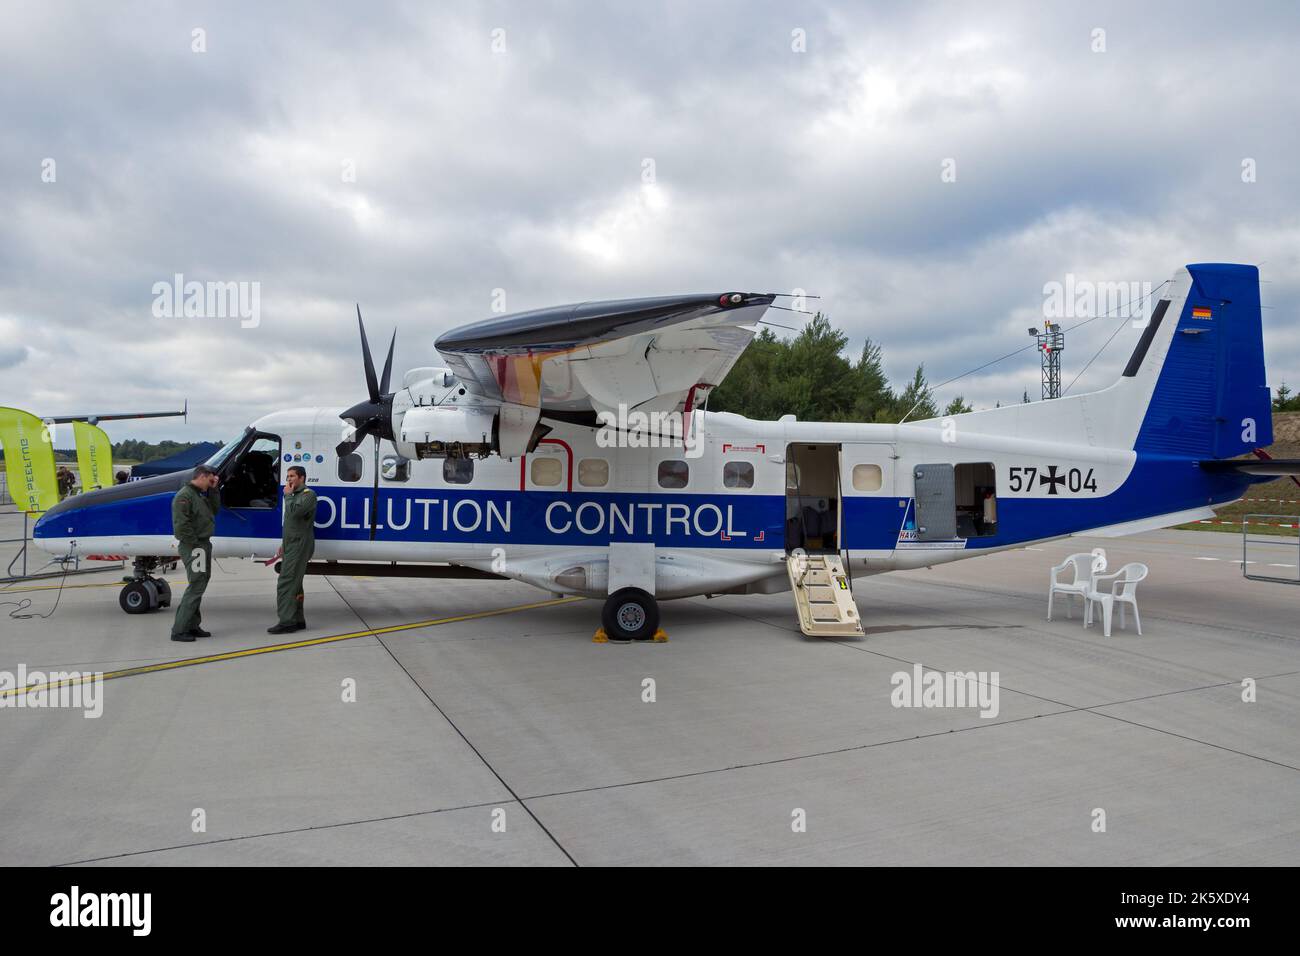 Dornier Do-228NG Special Mission Aircraft (Coastguard, Pollution Control) of the German Navy at Fliegerhorst Laage, August 23, 2014 Stock Photo